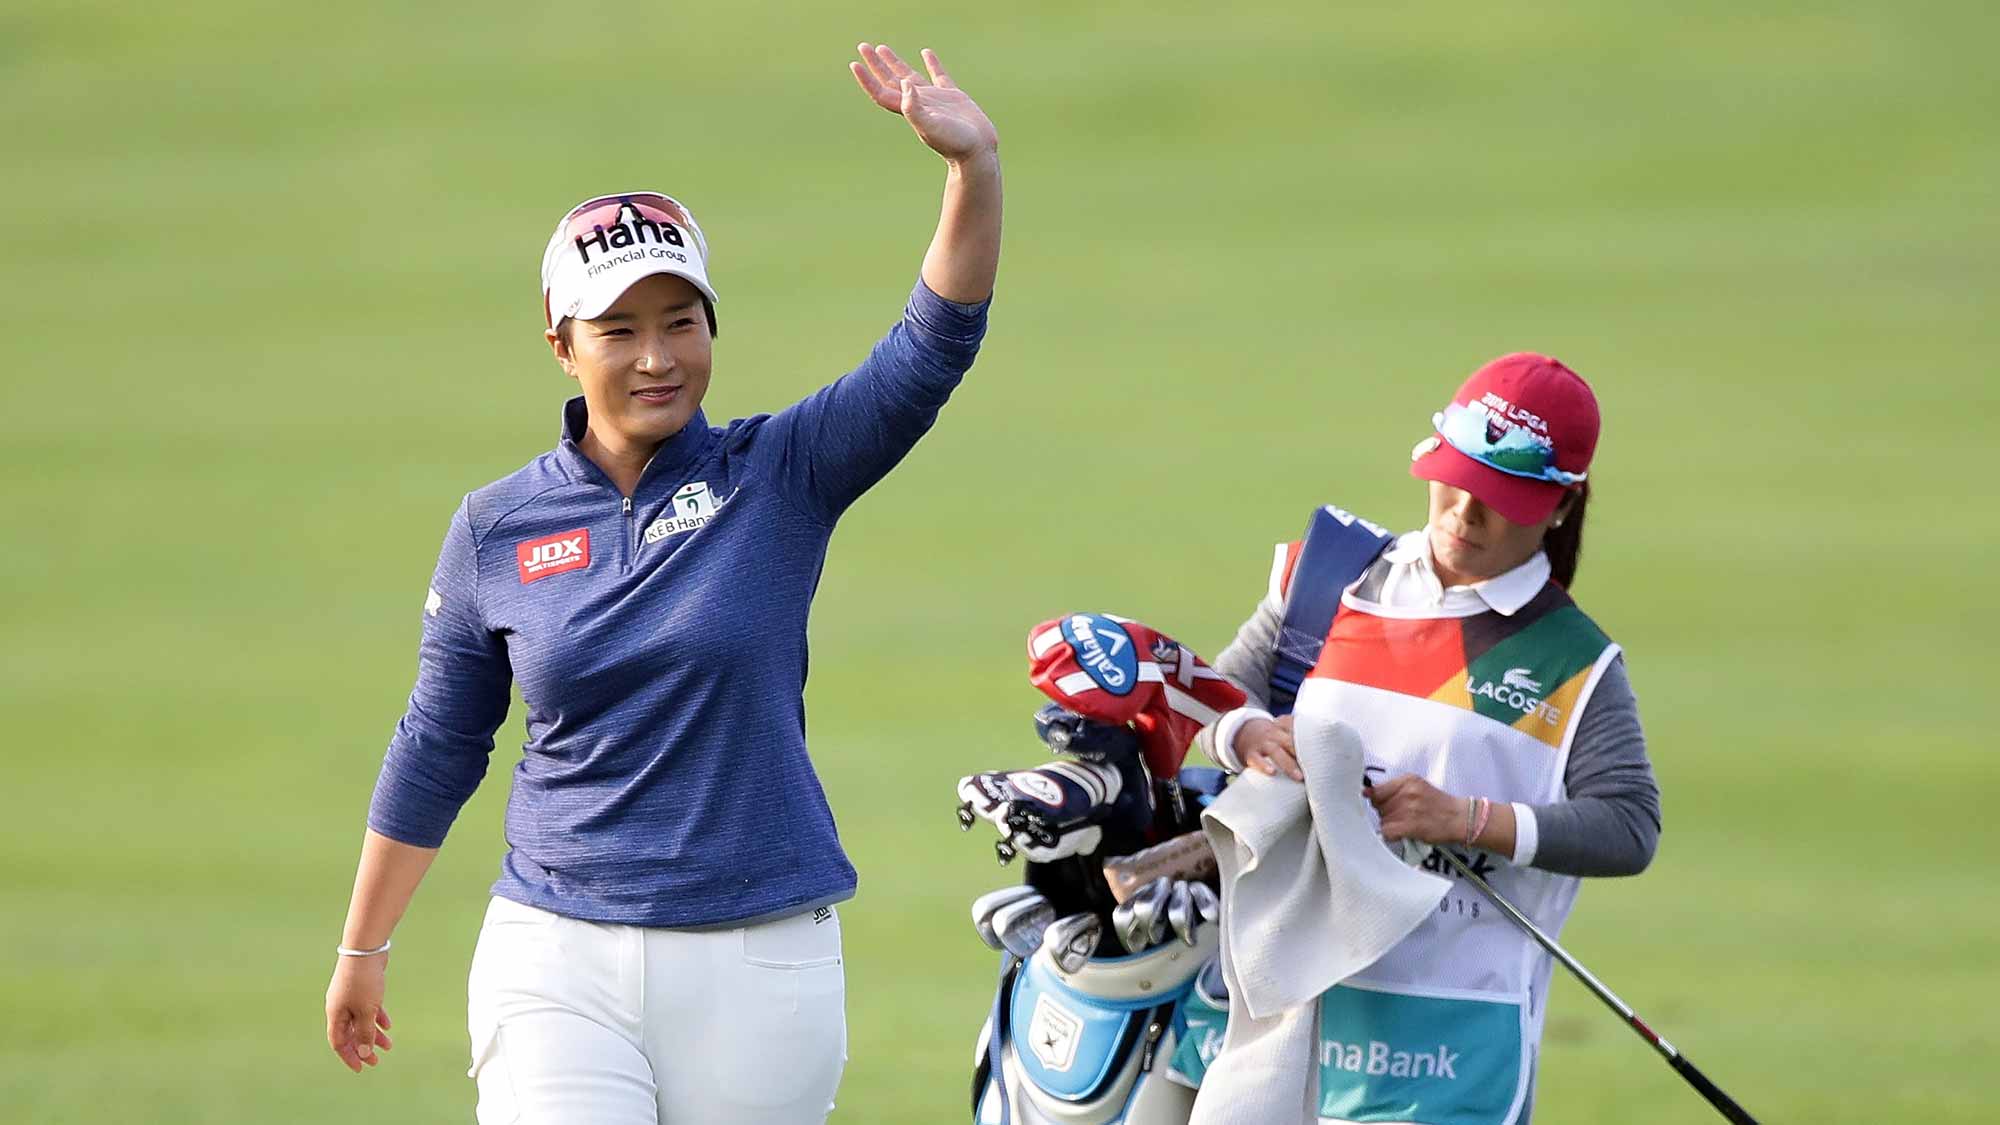 Se-Ri Pak of South Korea moves on the 18th hole during the first round of the LPGA KEB-Hana Bank Championship at the Sky 72 Golf Club Ocean Course